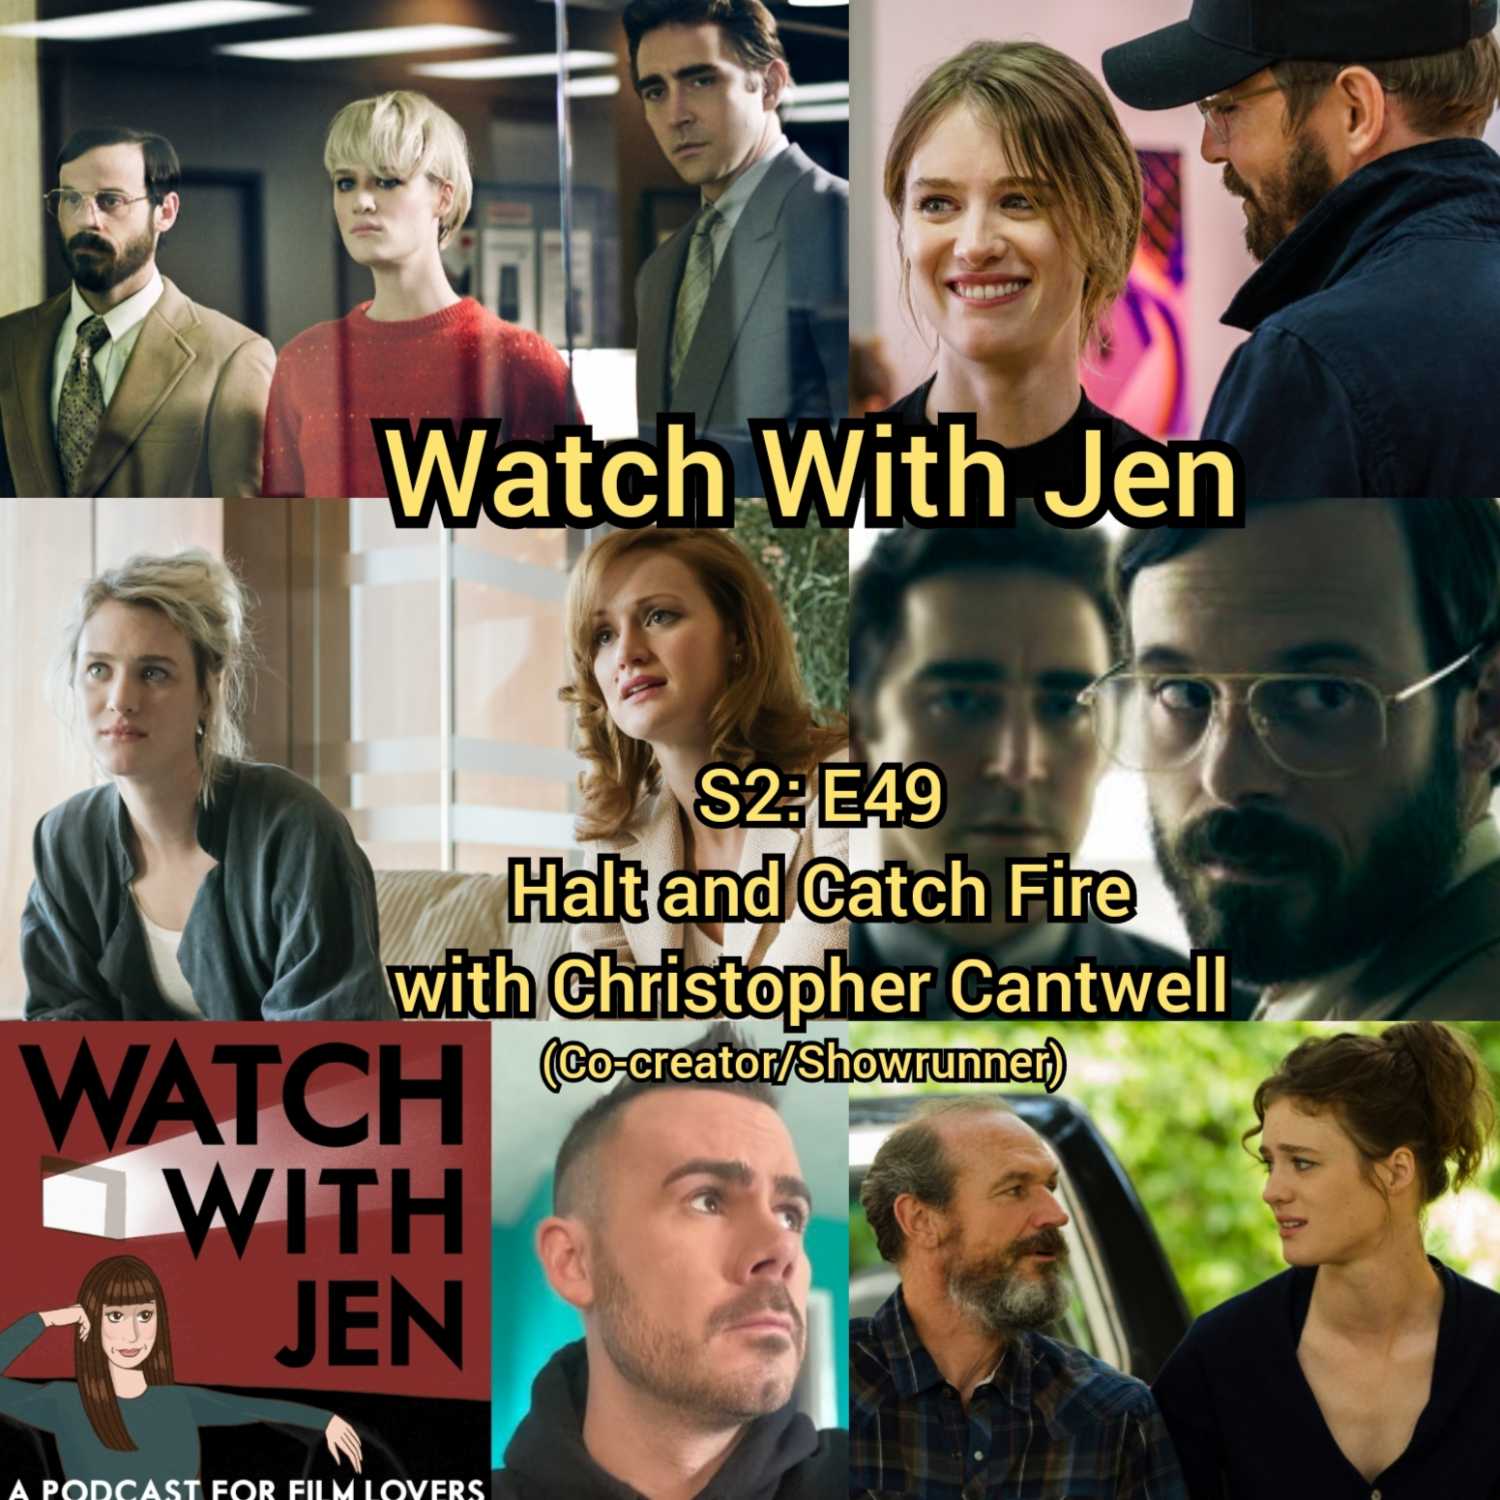 Watch With Jen - S2: E49 - Halt and Catch Fire with Christopher Cantwell (Co-Creator/Showrunner)